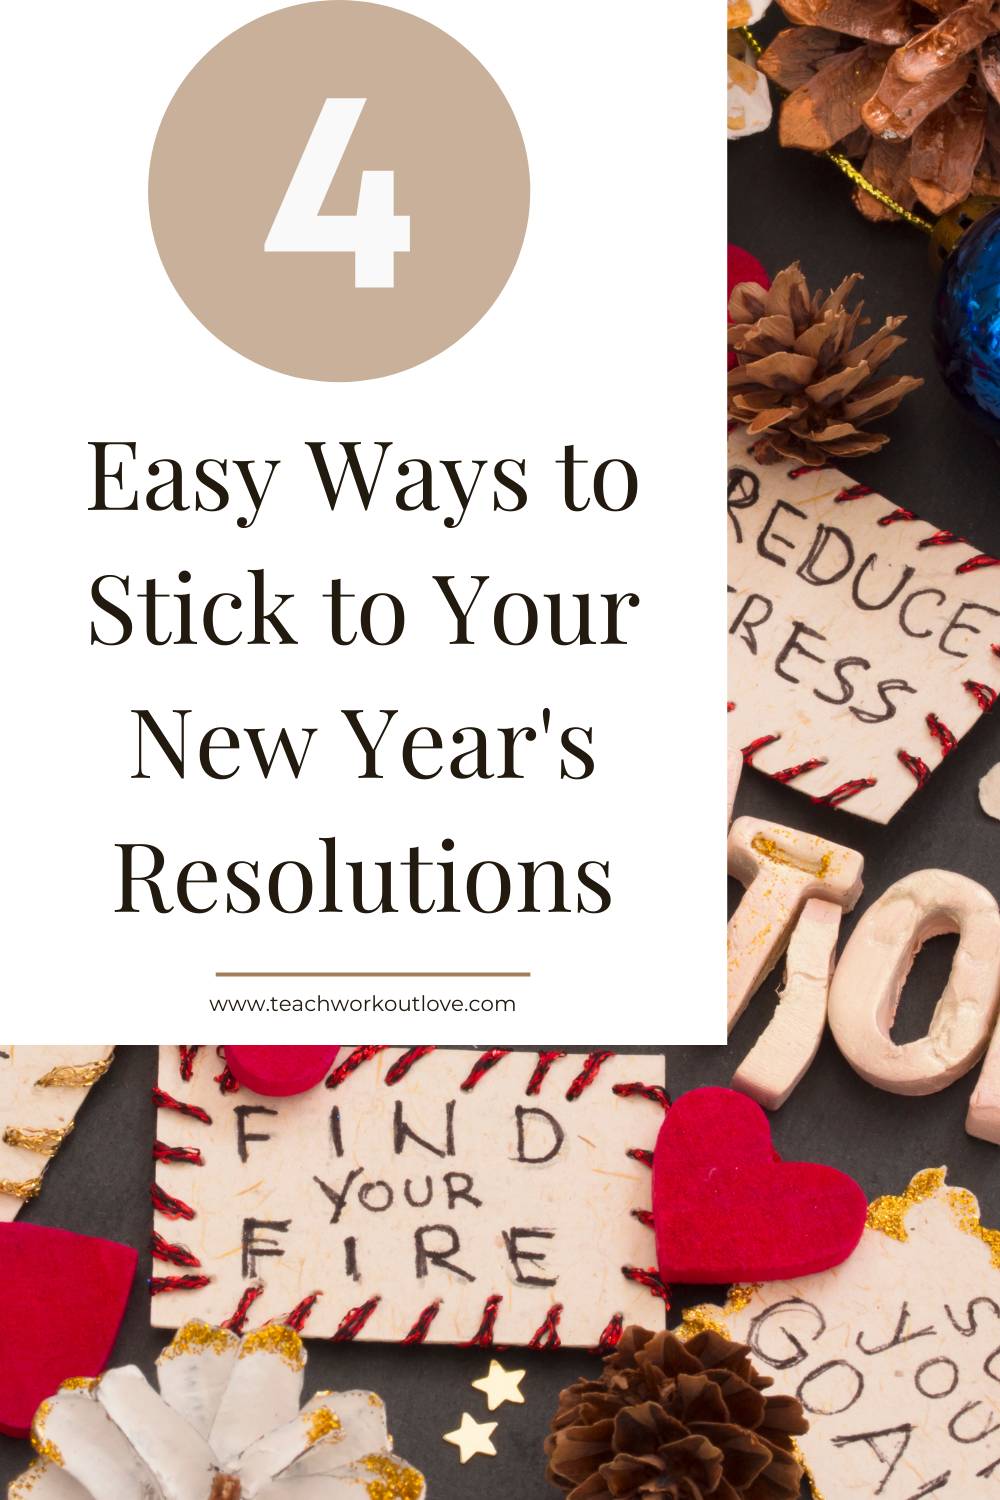 Another year has gone and what did you achieve? Let's make this year acheivable! Here's 4 tips to actually achieve your New Year's resolutions for 2021.